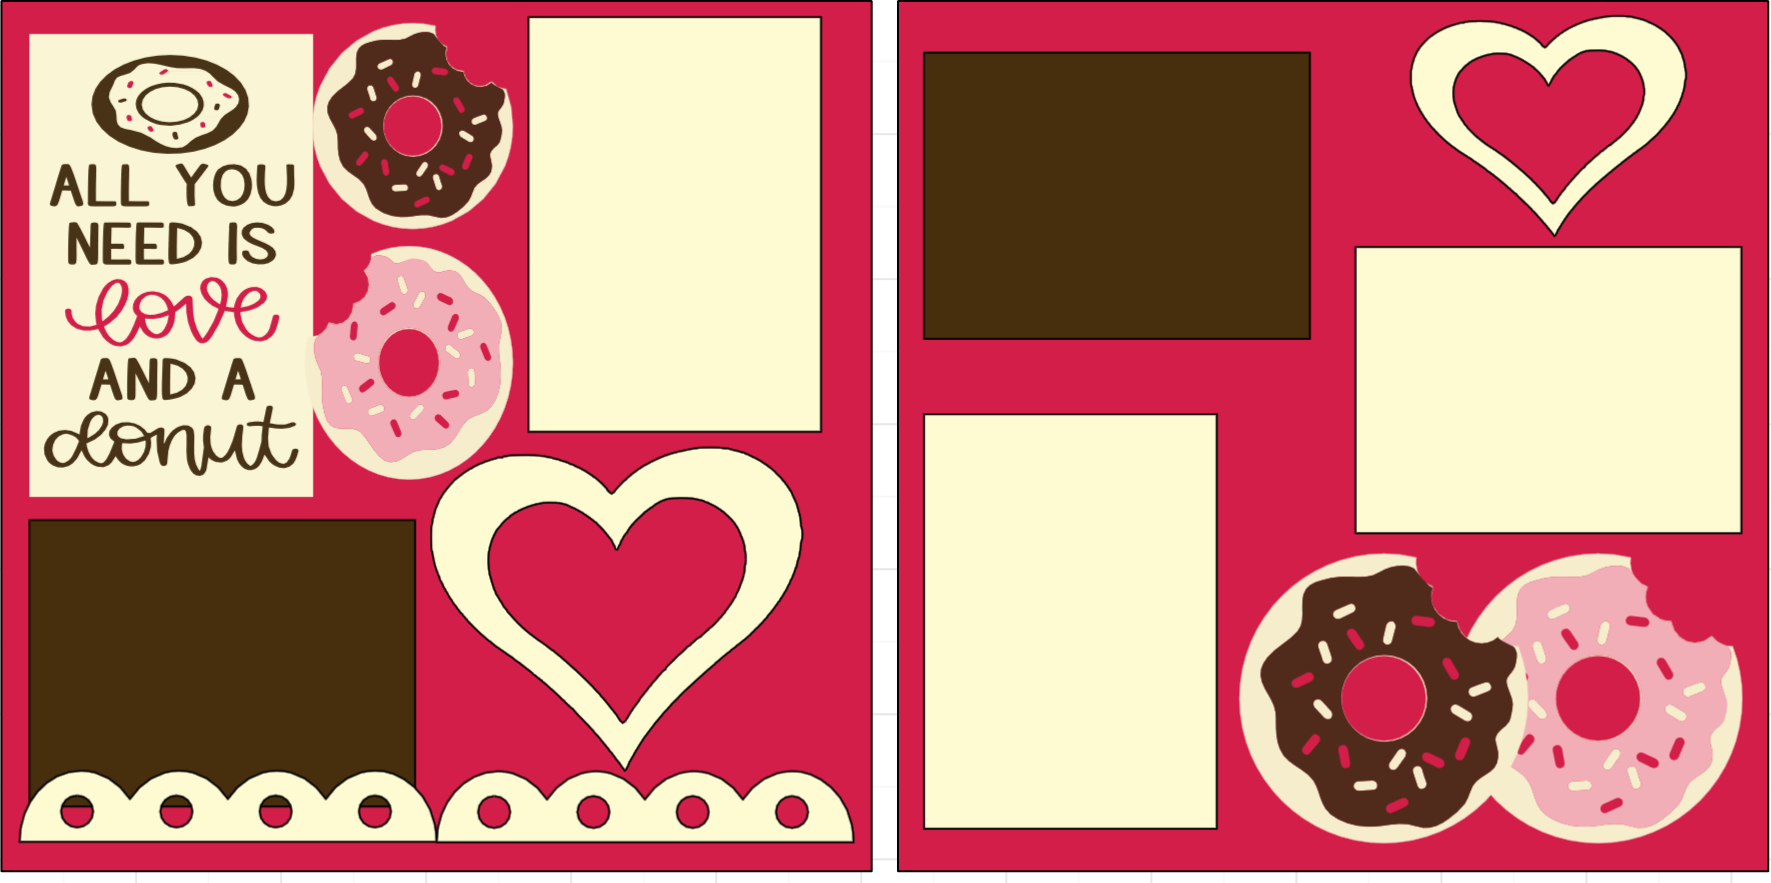 ALL YOU NEED IS LOVE AND A DONUT DIE CUTS ONLY